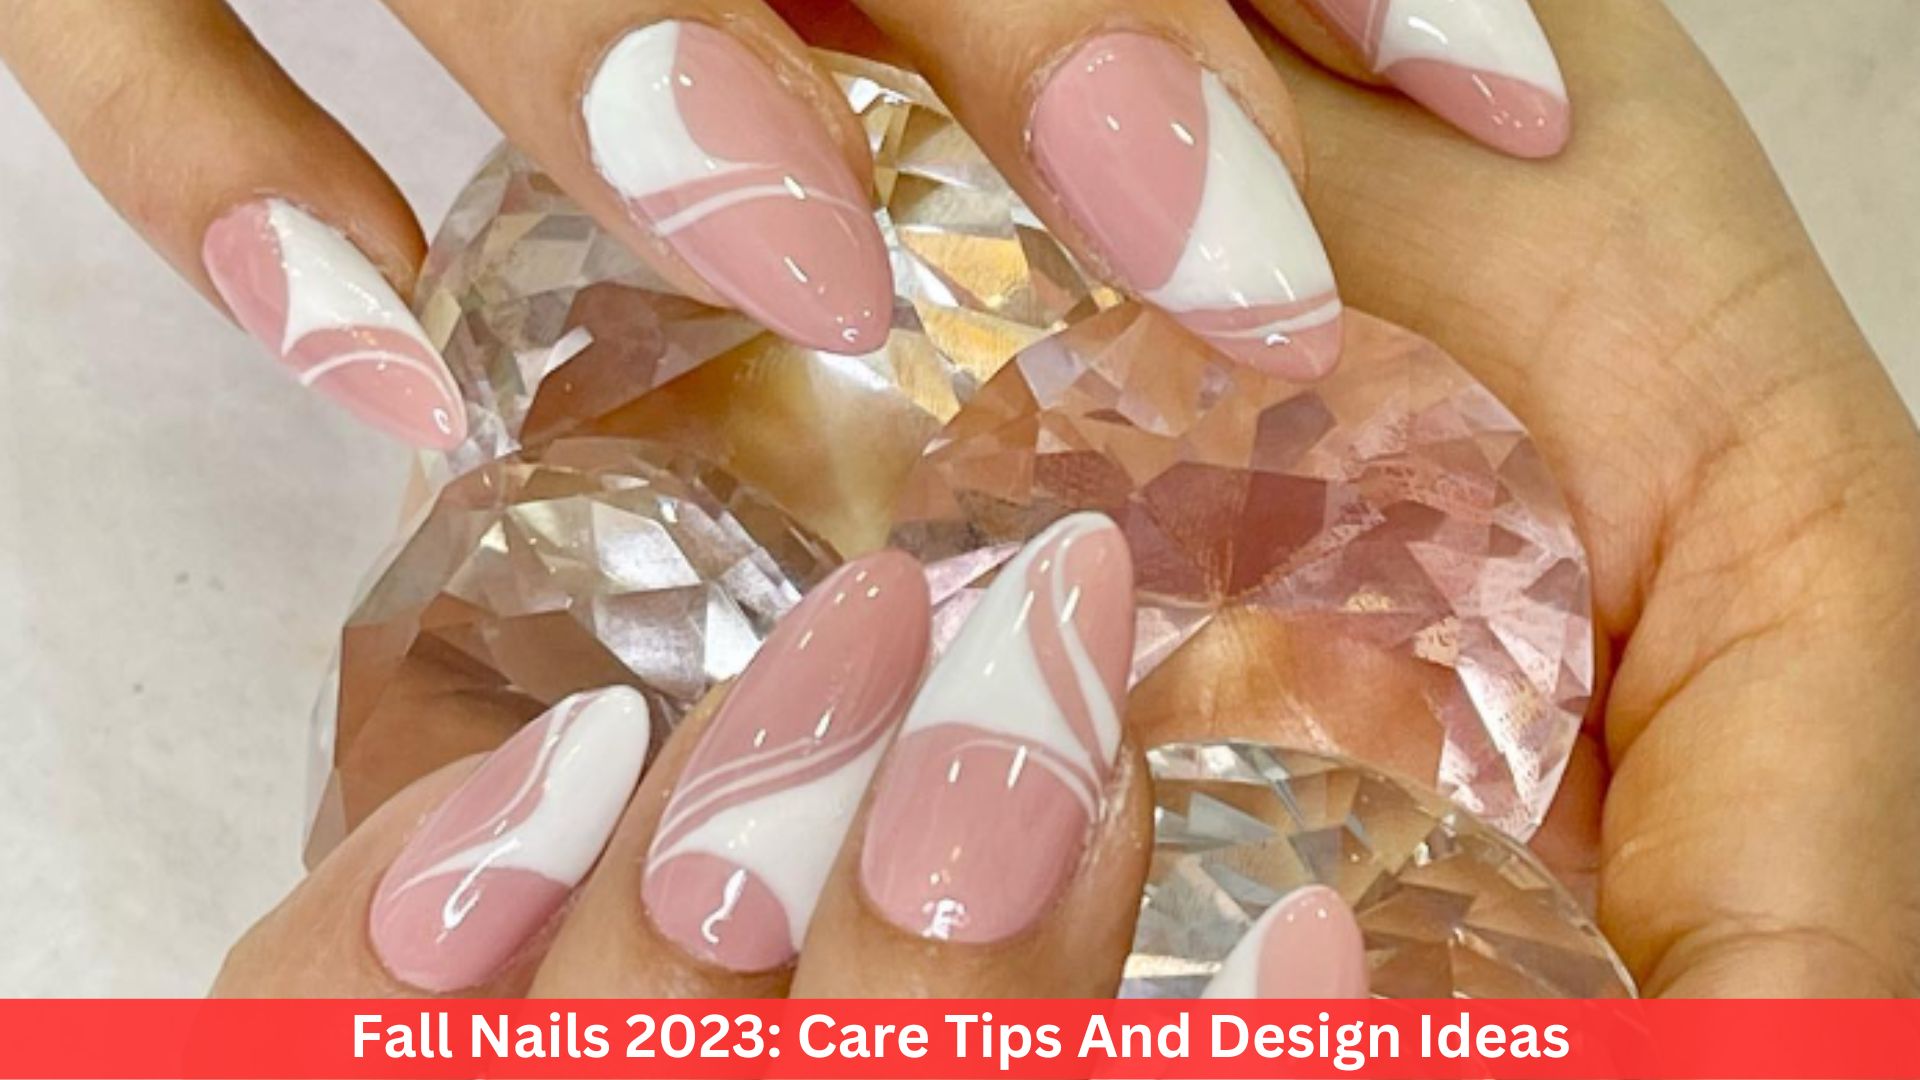 Fall Nails 2023: Care Tips And Design Ideas